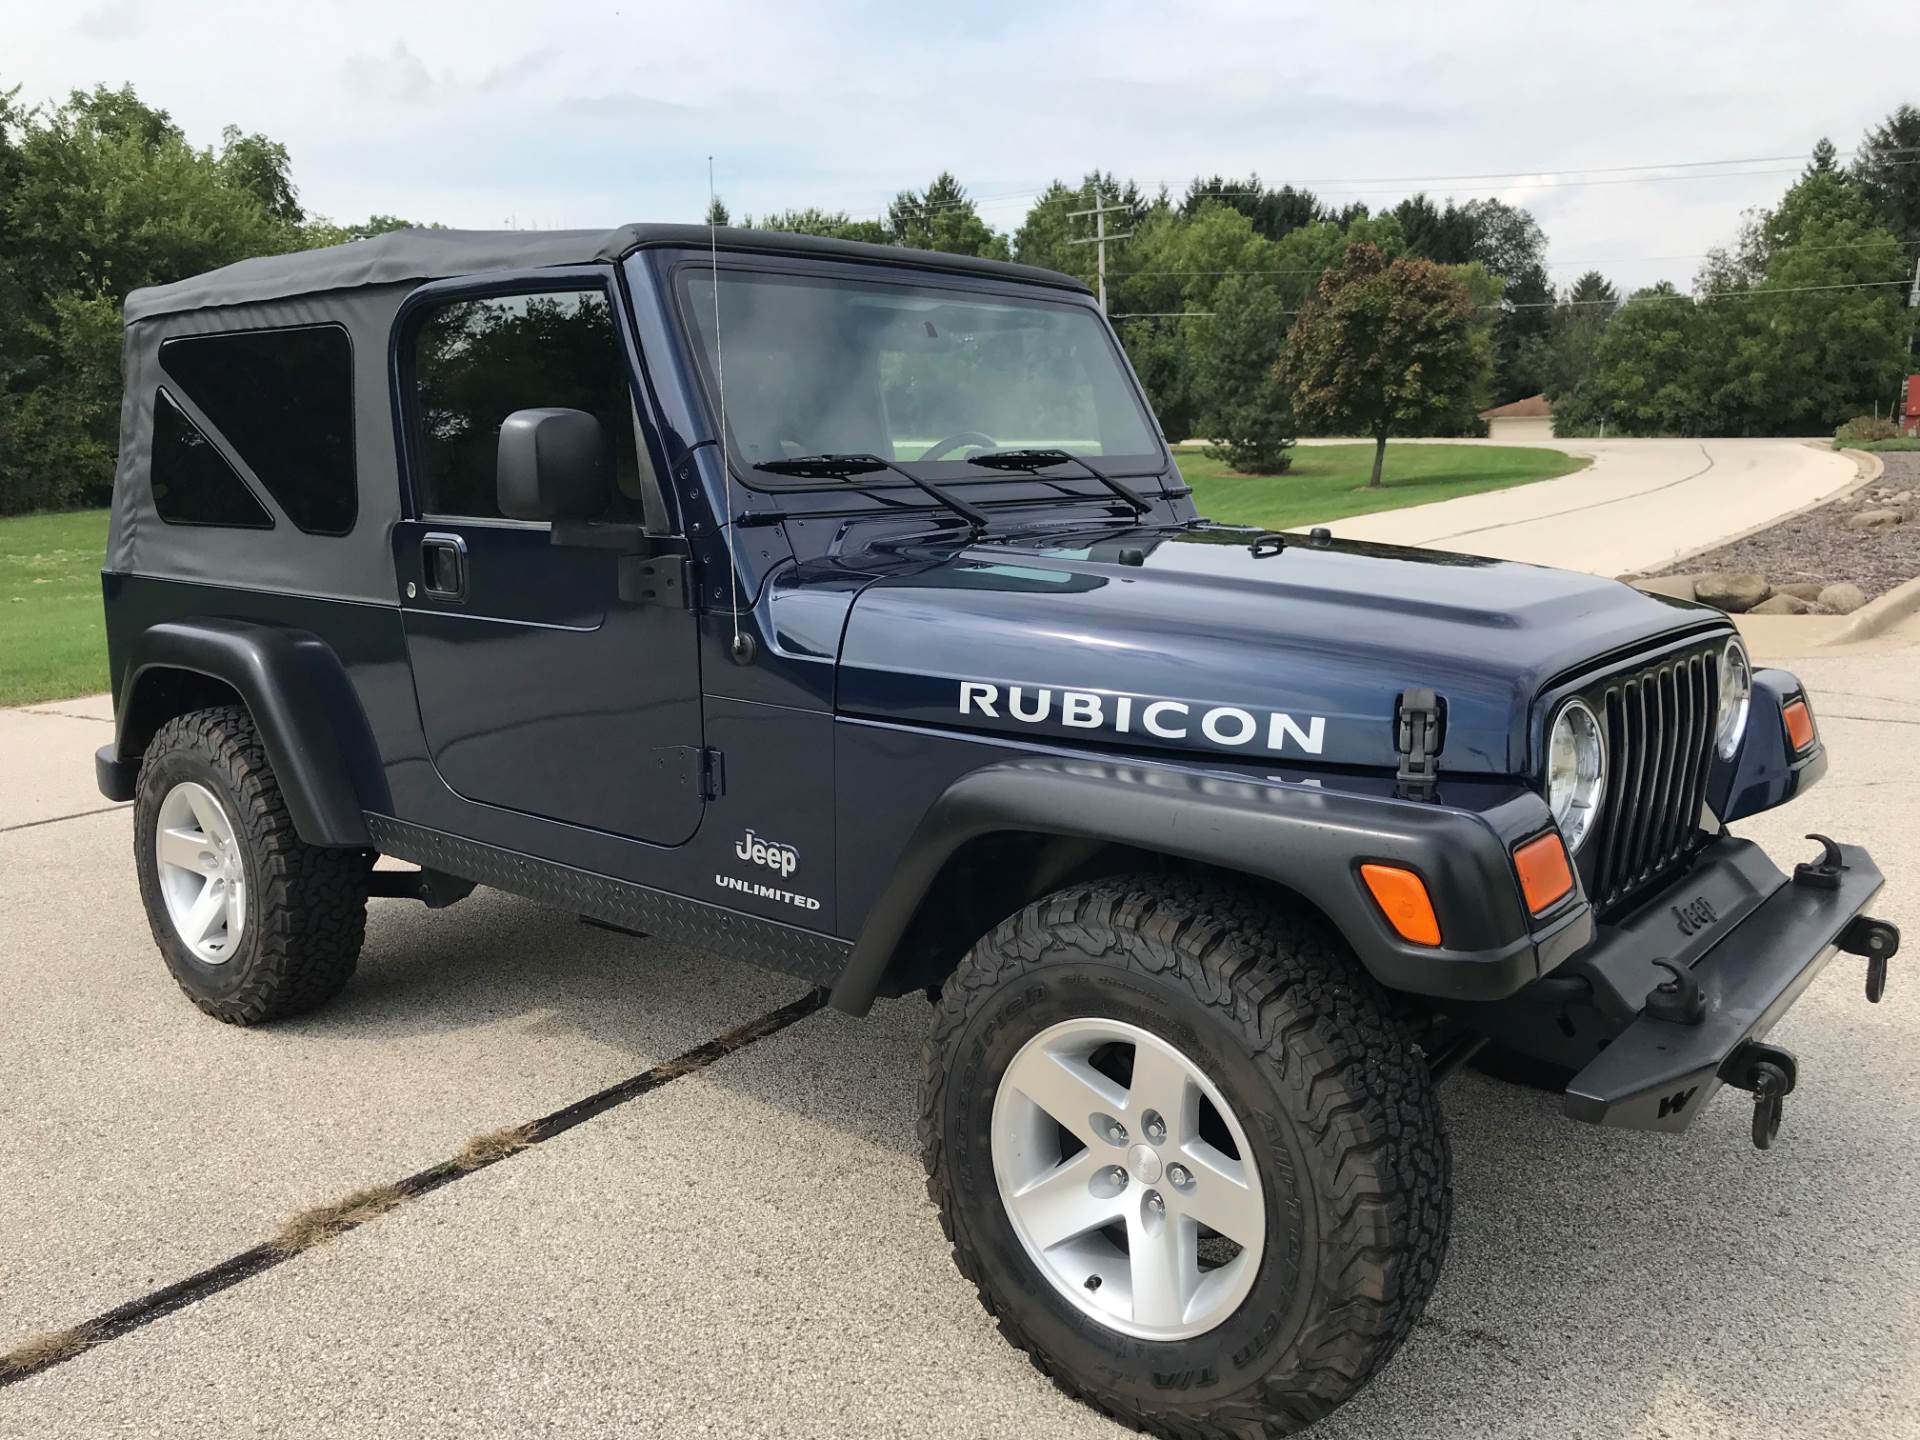 2006 Jeep Wrangler Unlimited Rubicon 2dr SUV 4WD in Big Bend, Wisconsin - Photo 100